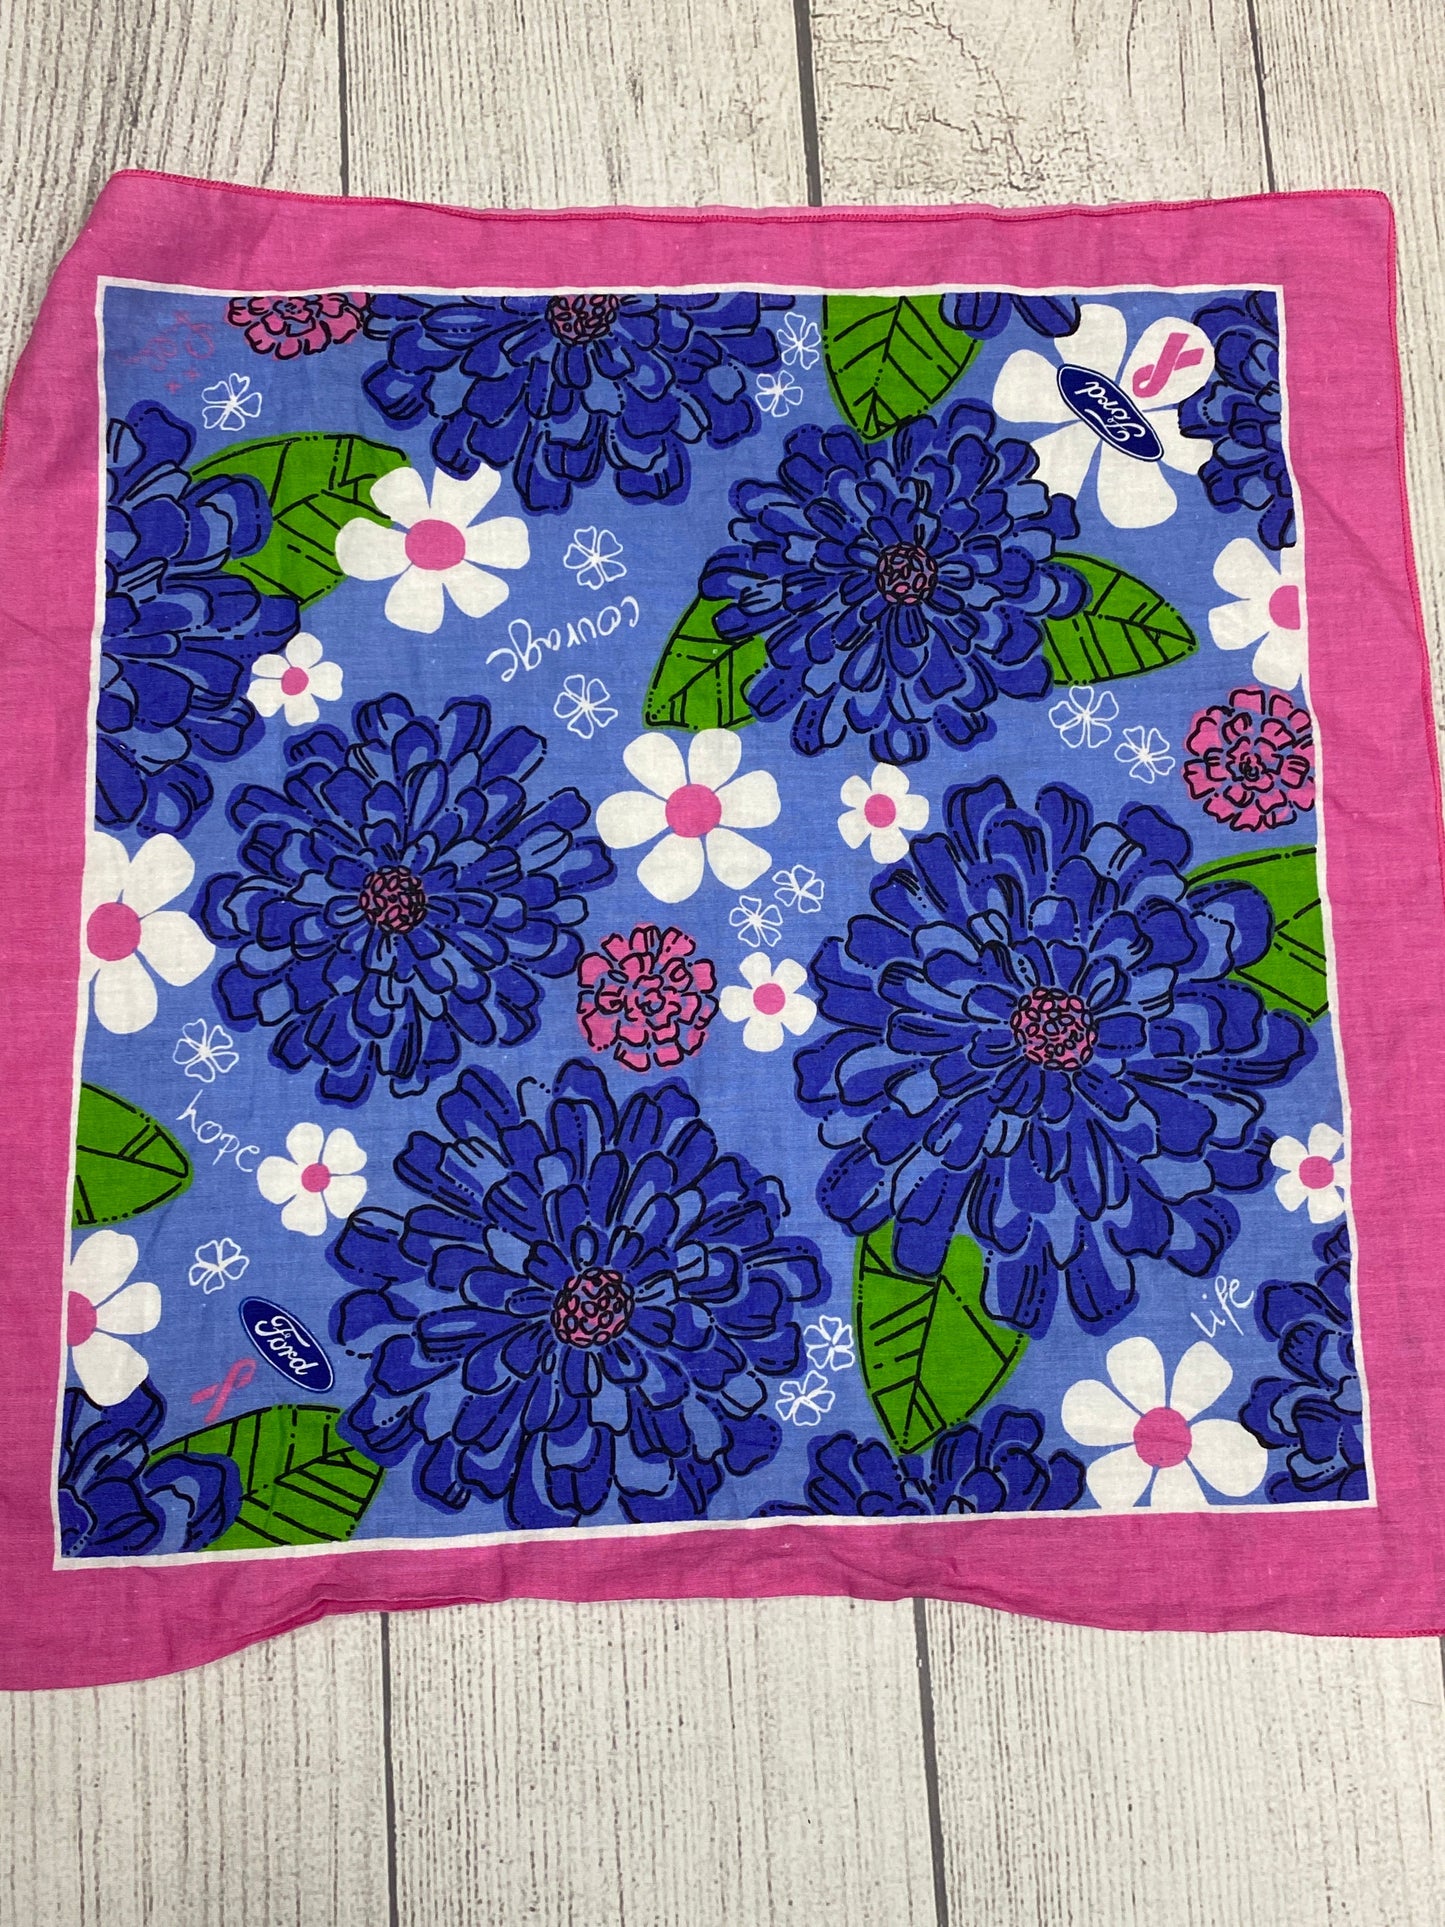 Scarf Square Lilly Pulitzer